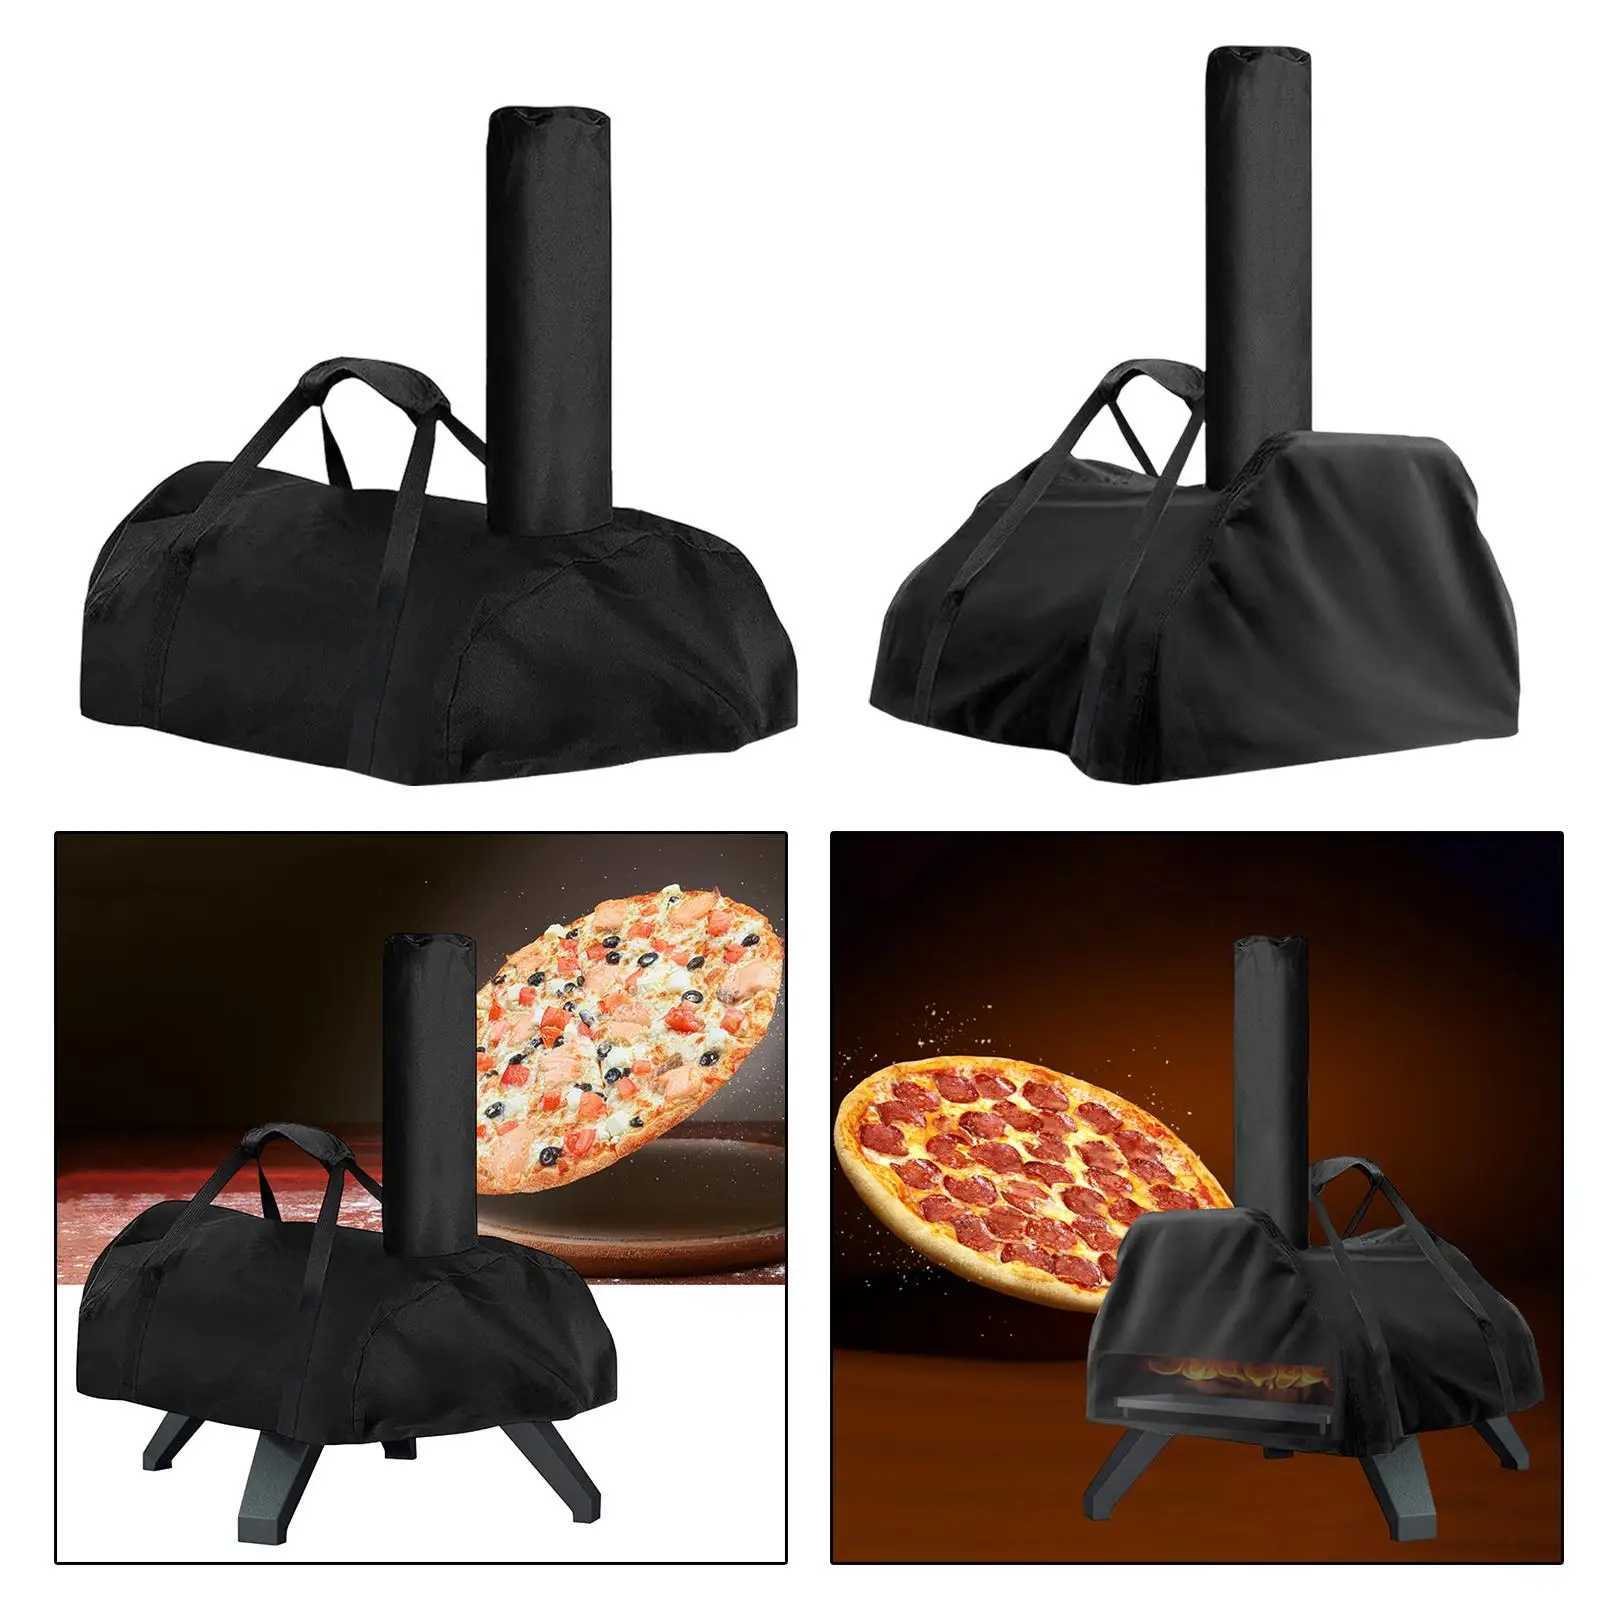 Outdoor Pizza Oven Cover Accs Protective Dustproof Portable Waterproof Supply